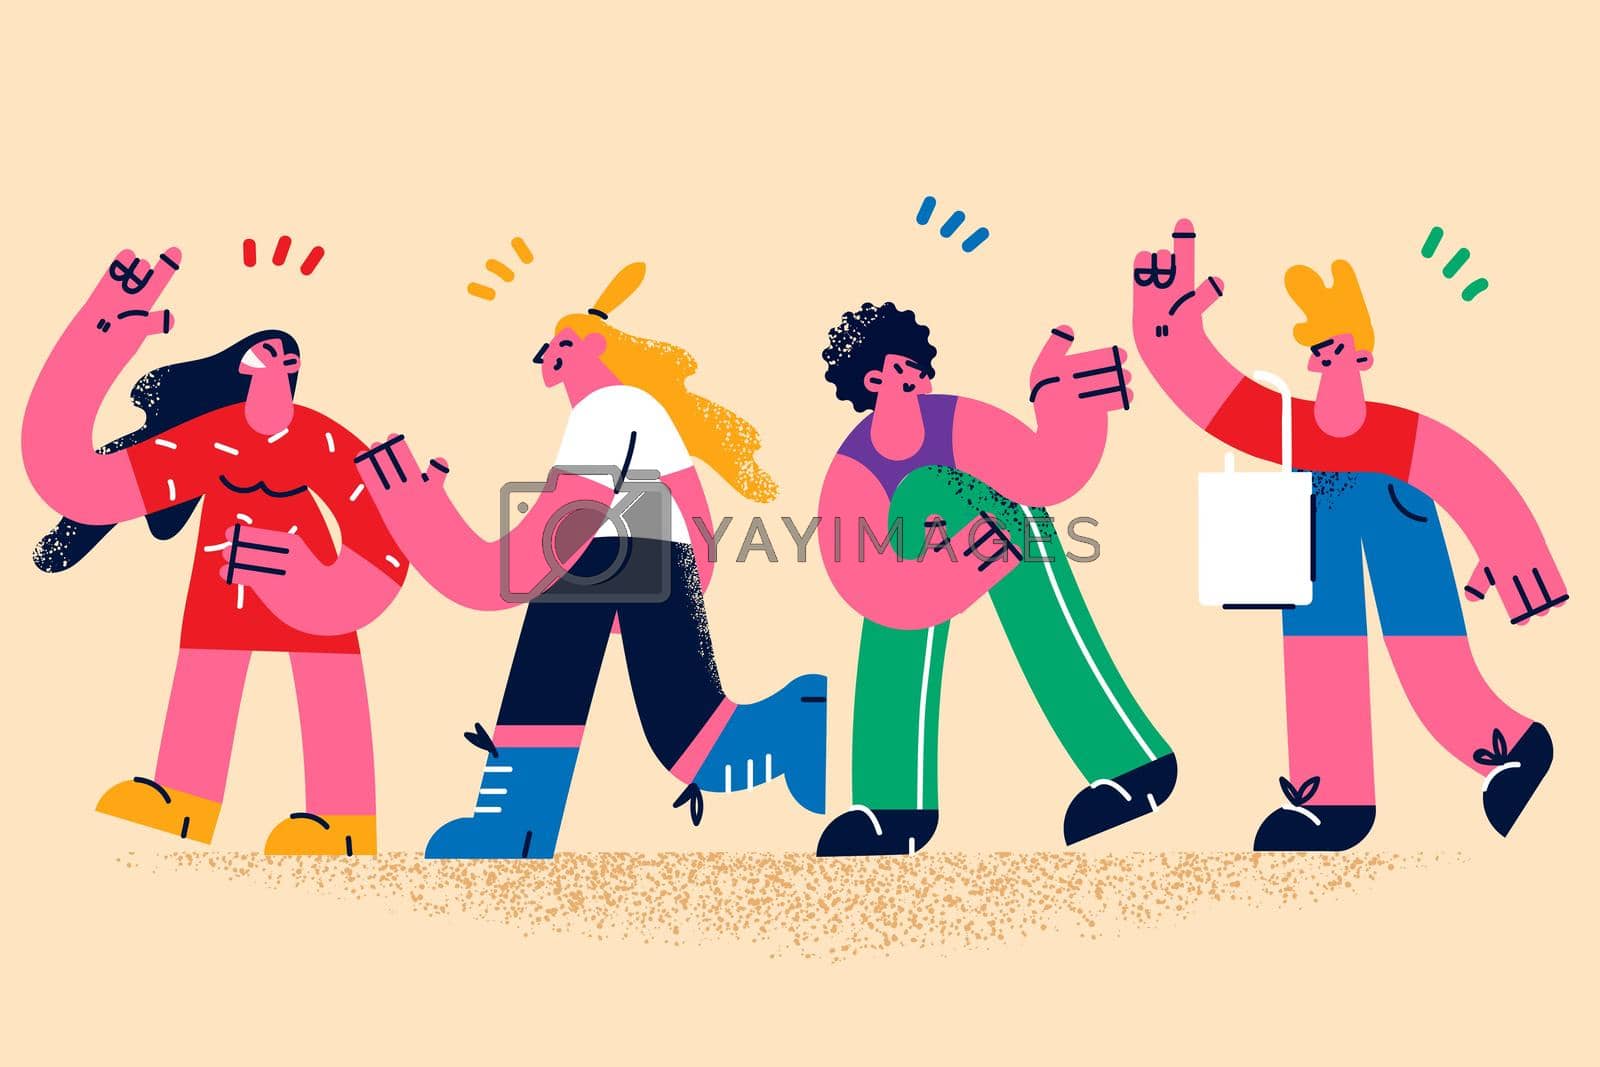 People communicating and greeting each other concept. Group of young smiling people waving hands greeting or congratulating each other vector illustration